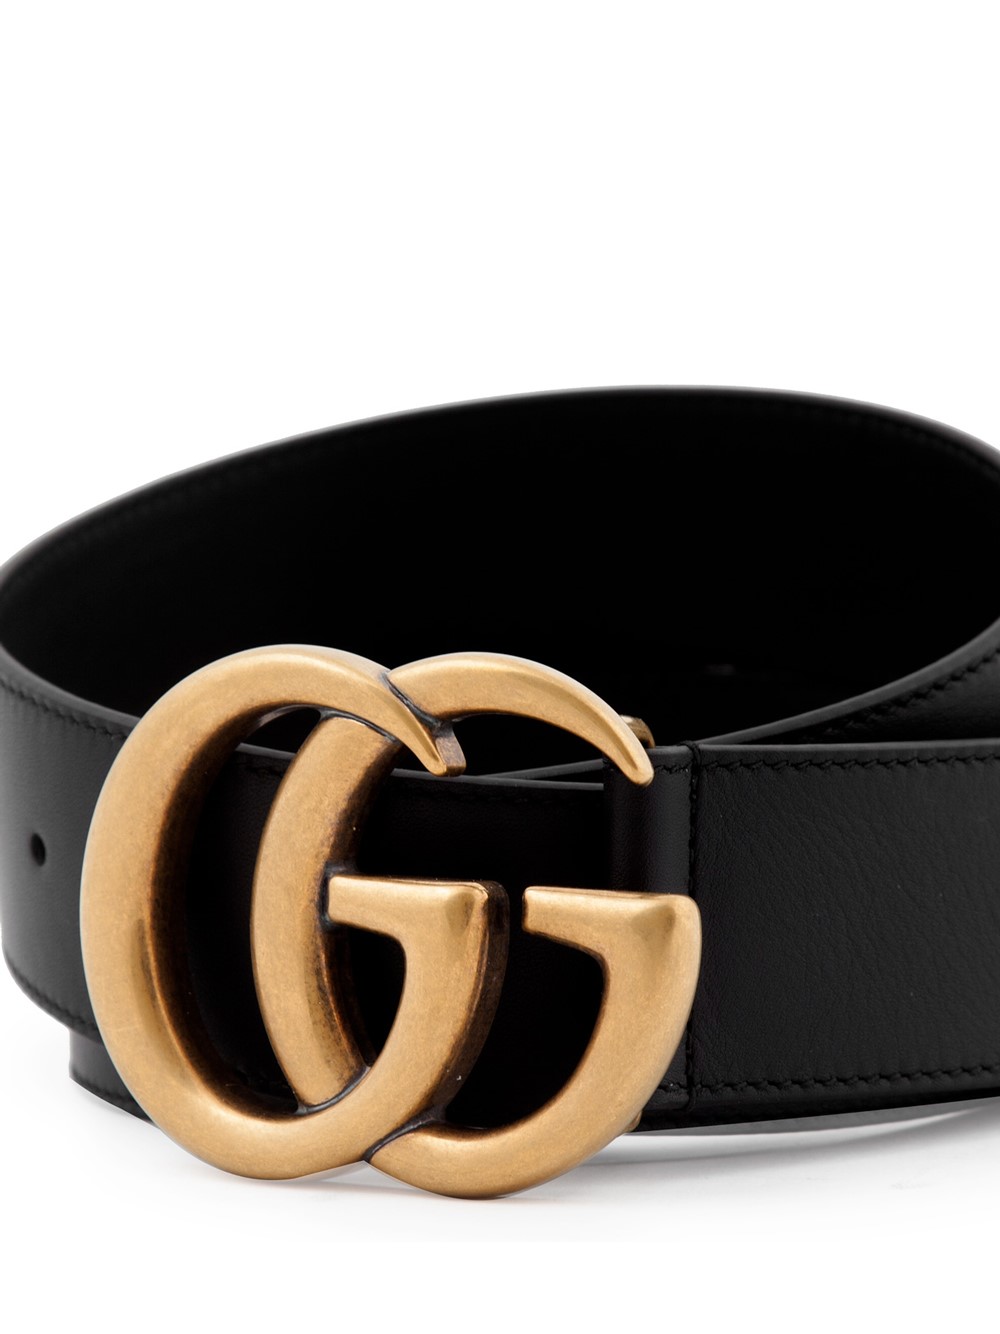 gucci GG MARMONT BELT available on www.ermes-unice.fr - 28984